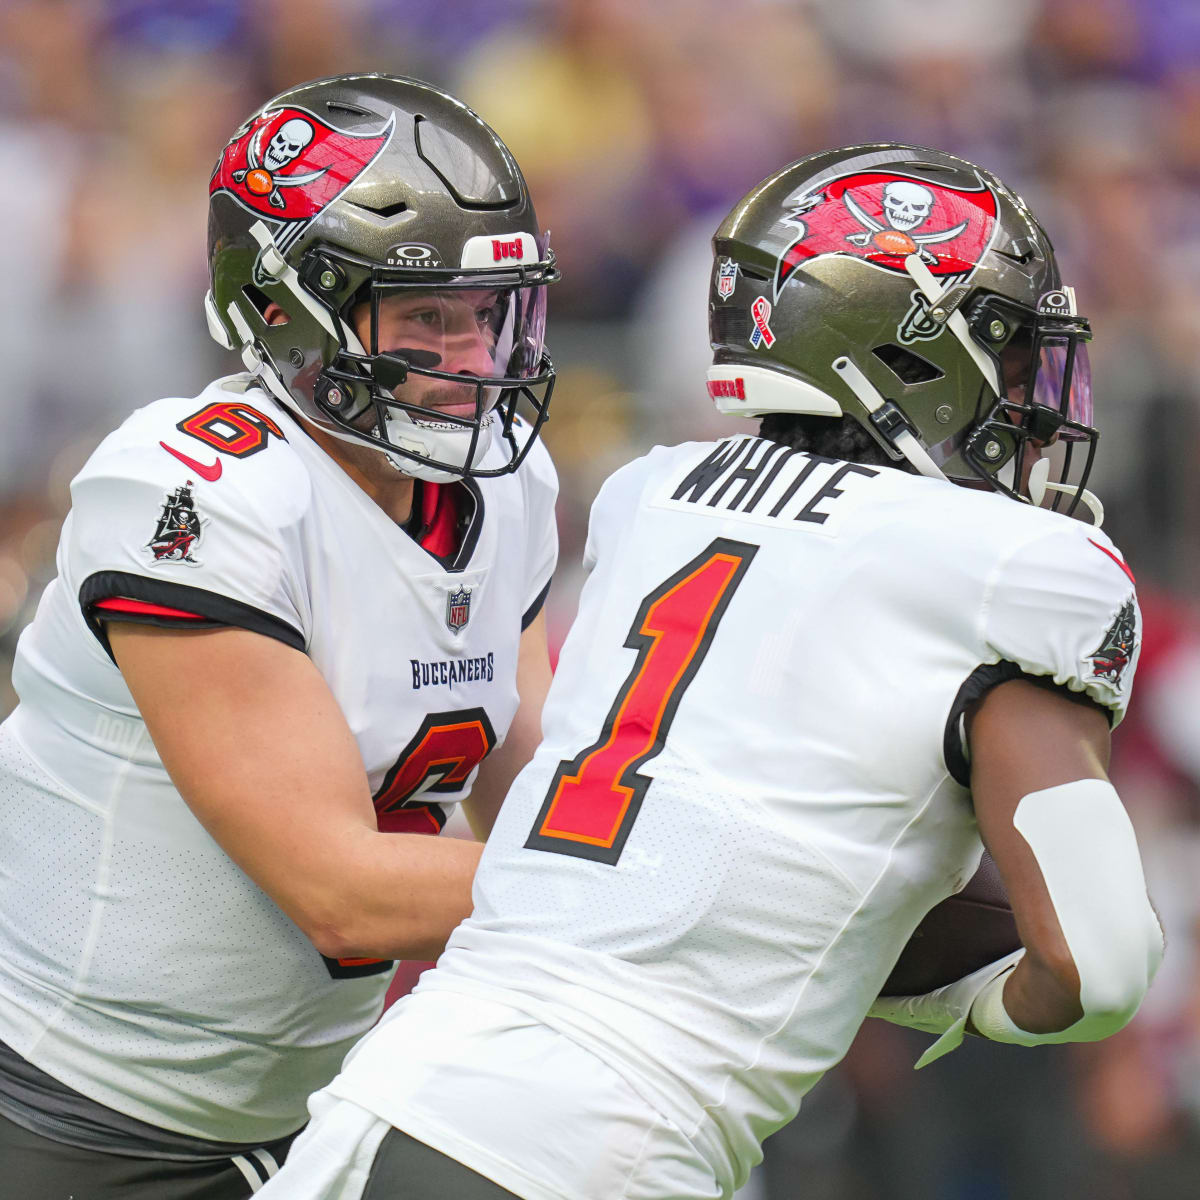 Through The Spyglass: Detroit Lions at Tampa Bay Buccaneers